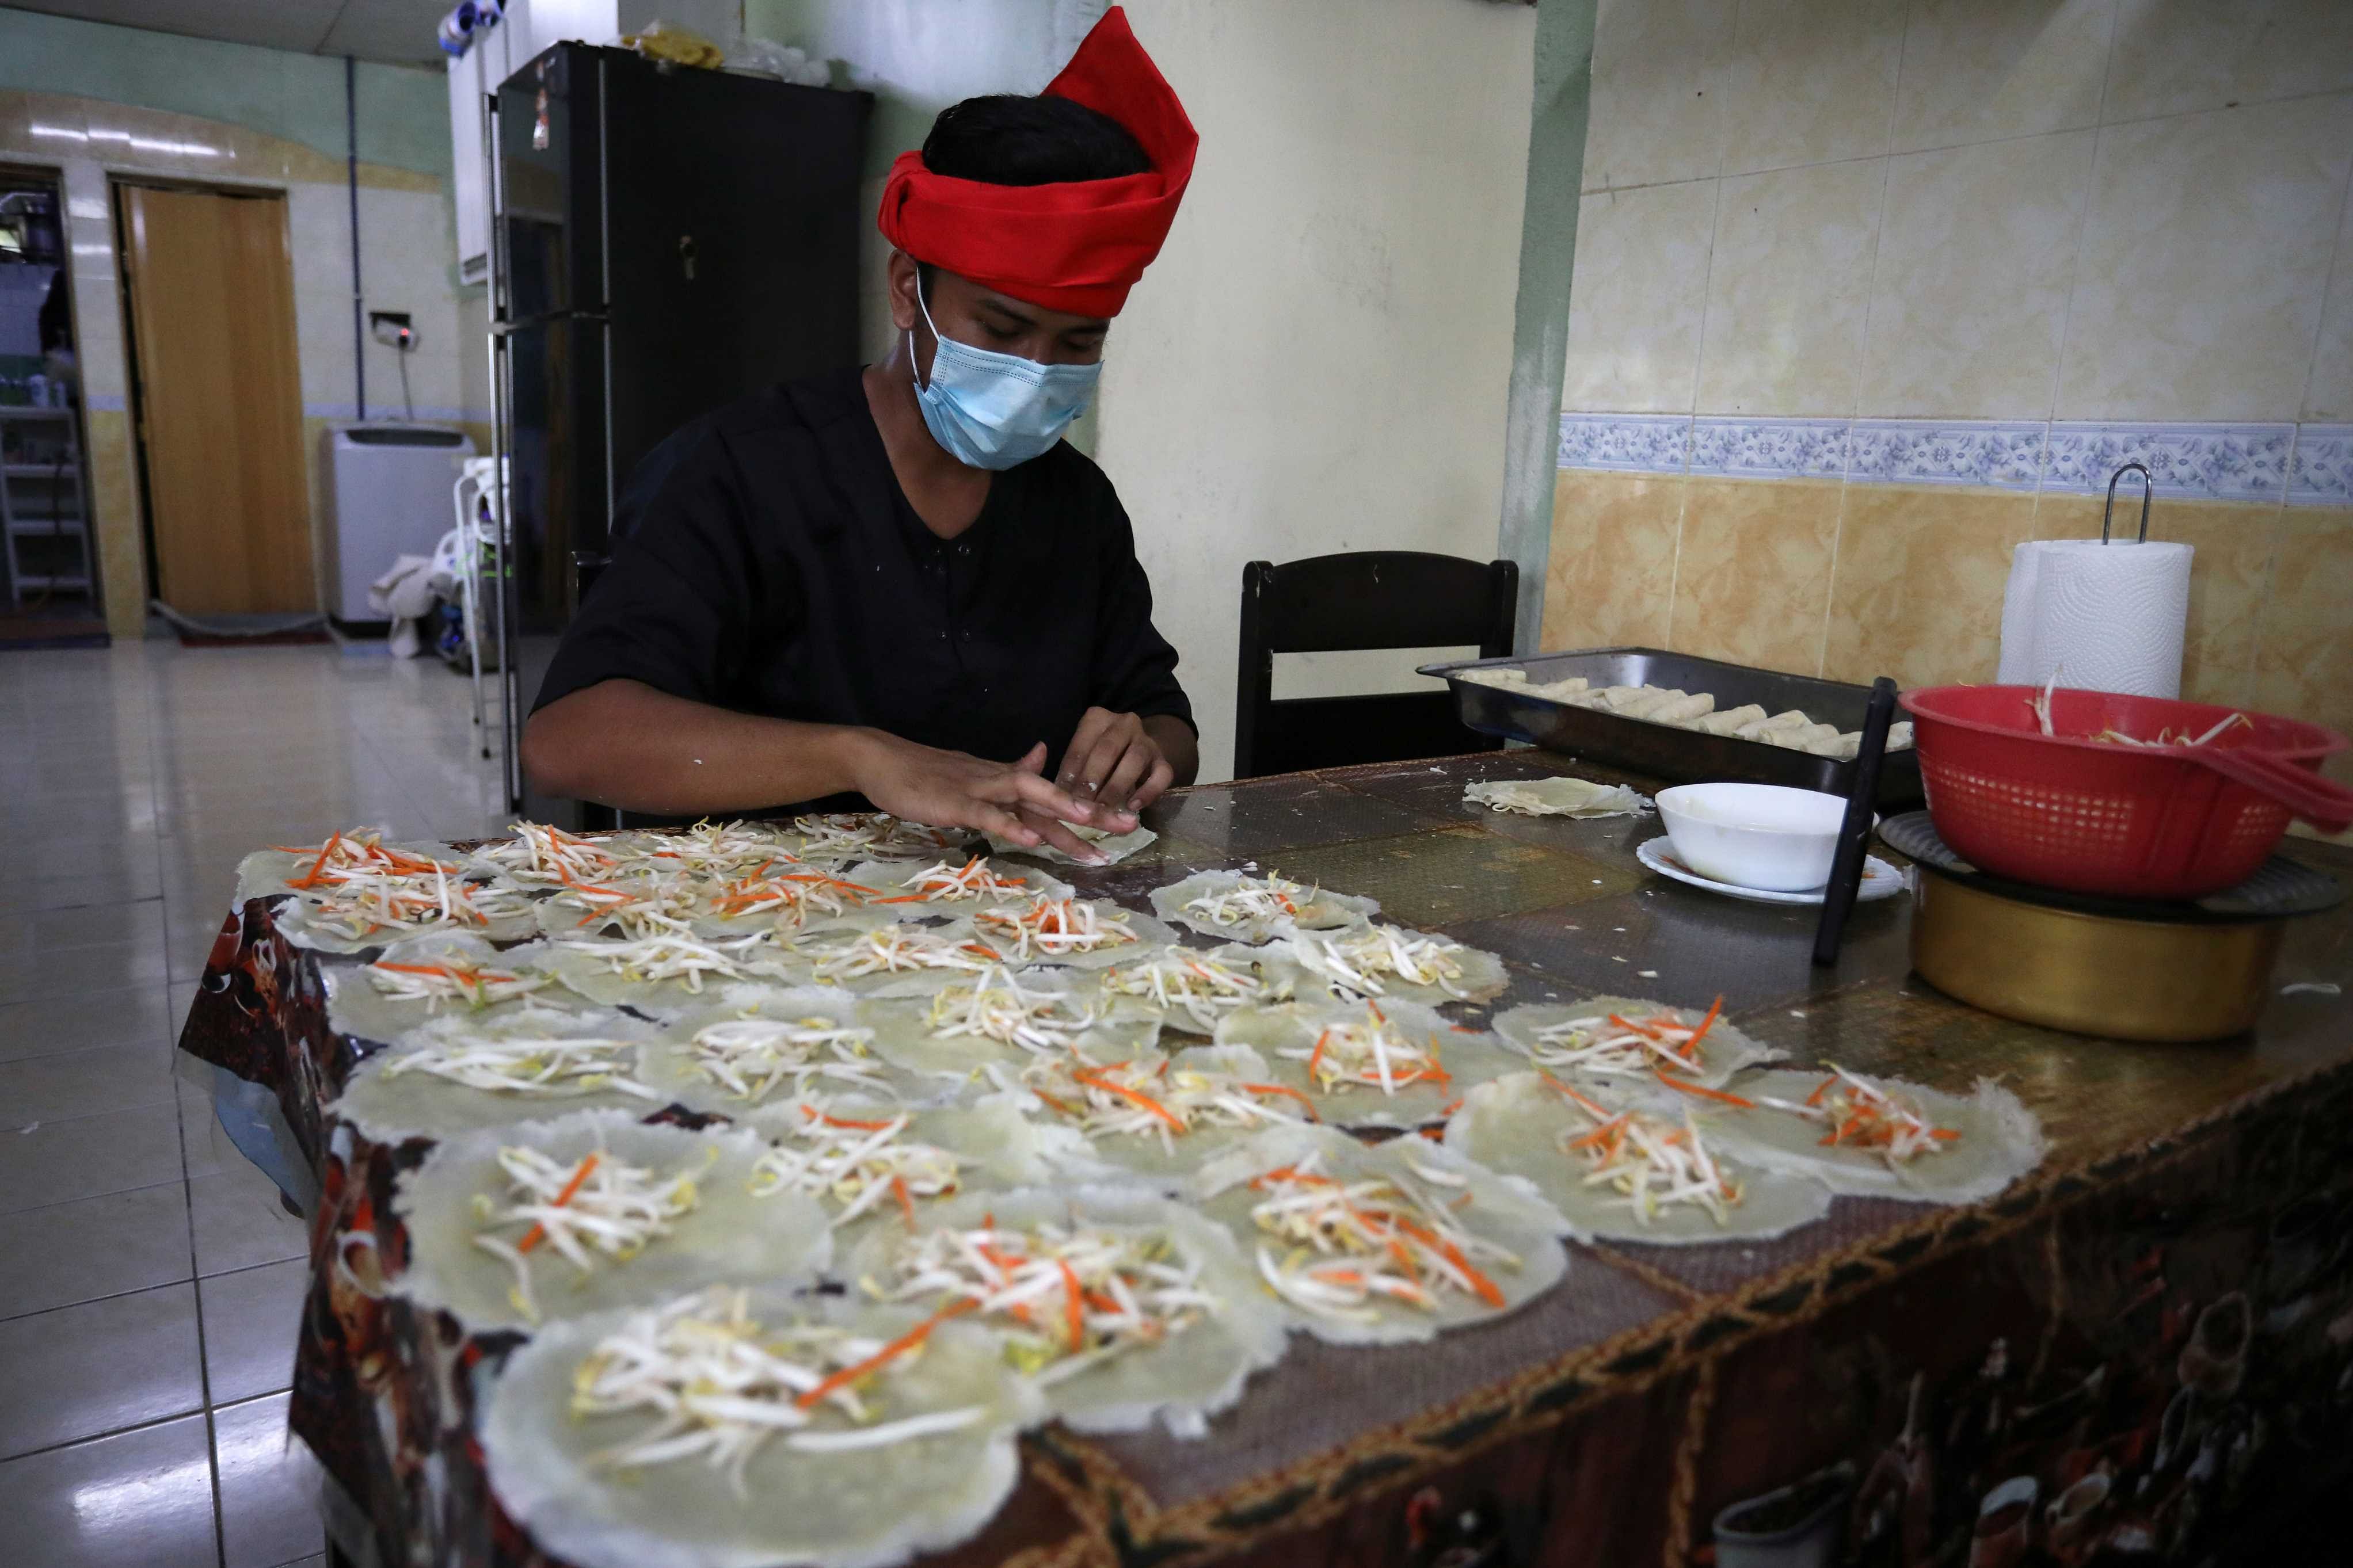 An online Ramadan bazaar trader wraps "Popiah" spring rolls at his home, during the movement control order due to the outbreak of the coronavirus disease (COVID-19), in Sungai Buloh, Malaysia. (Reuters)